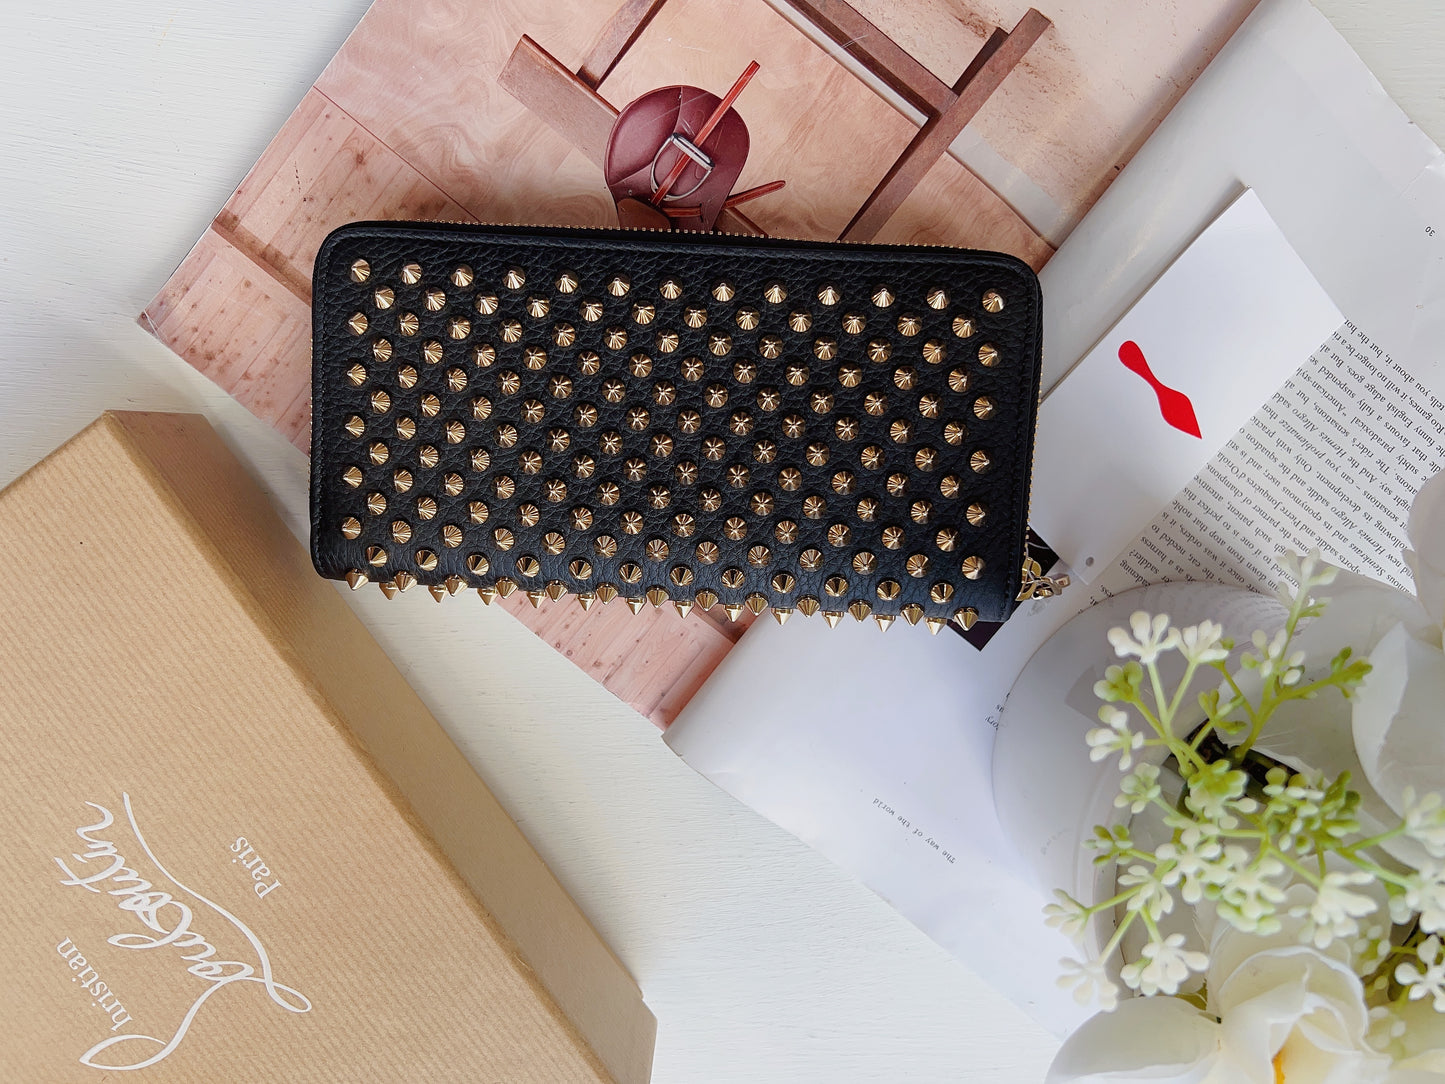 Christian Louboutin Calf leather and spikes wallet Black New